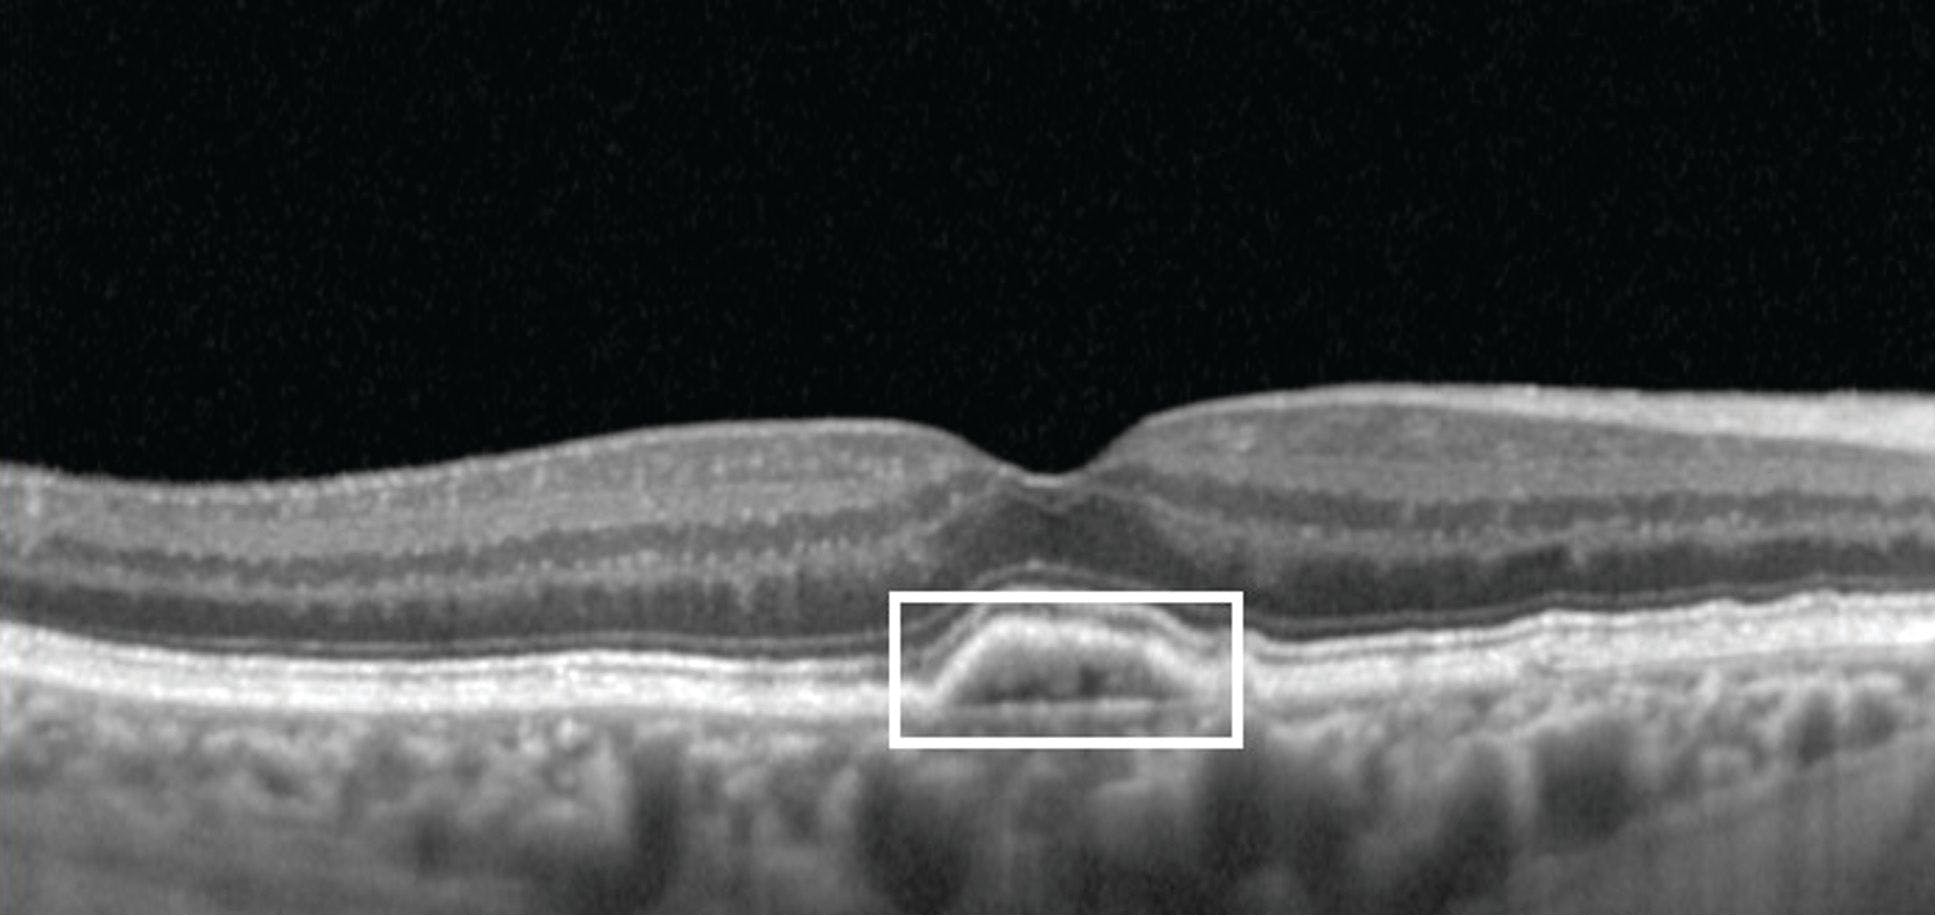 OCT biomarkers associated with advanced age-related macular degeneration